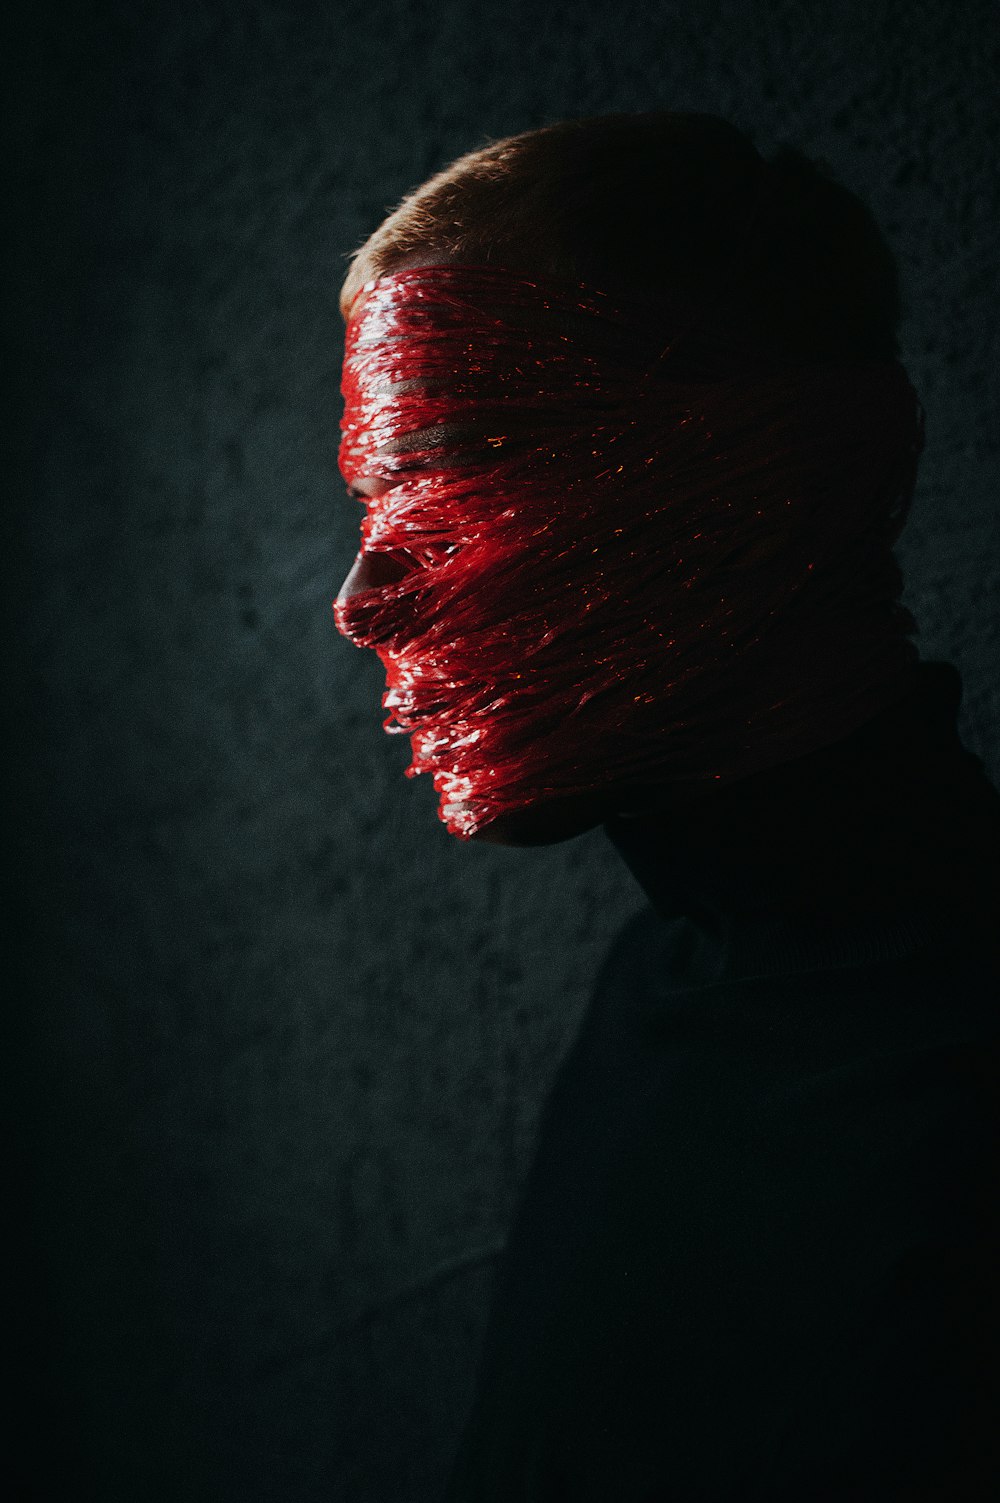 a person with a red hair covering their face